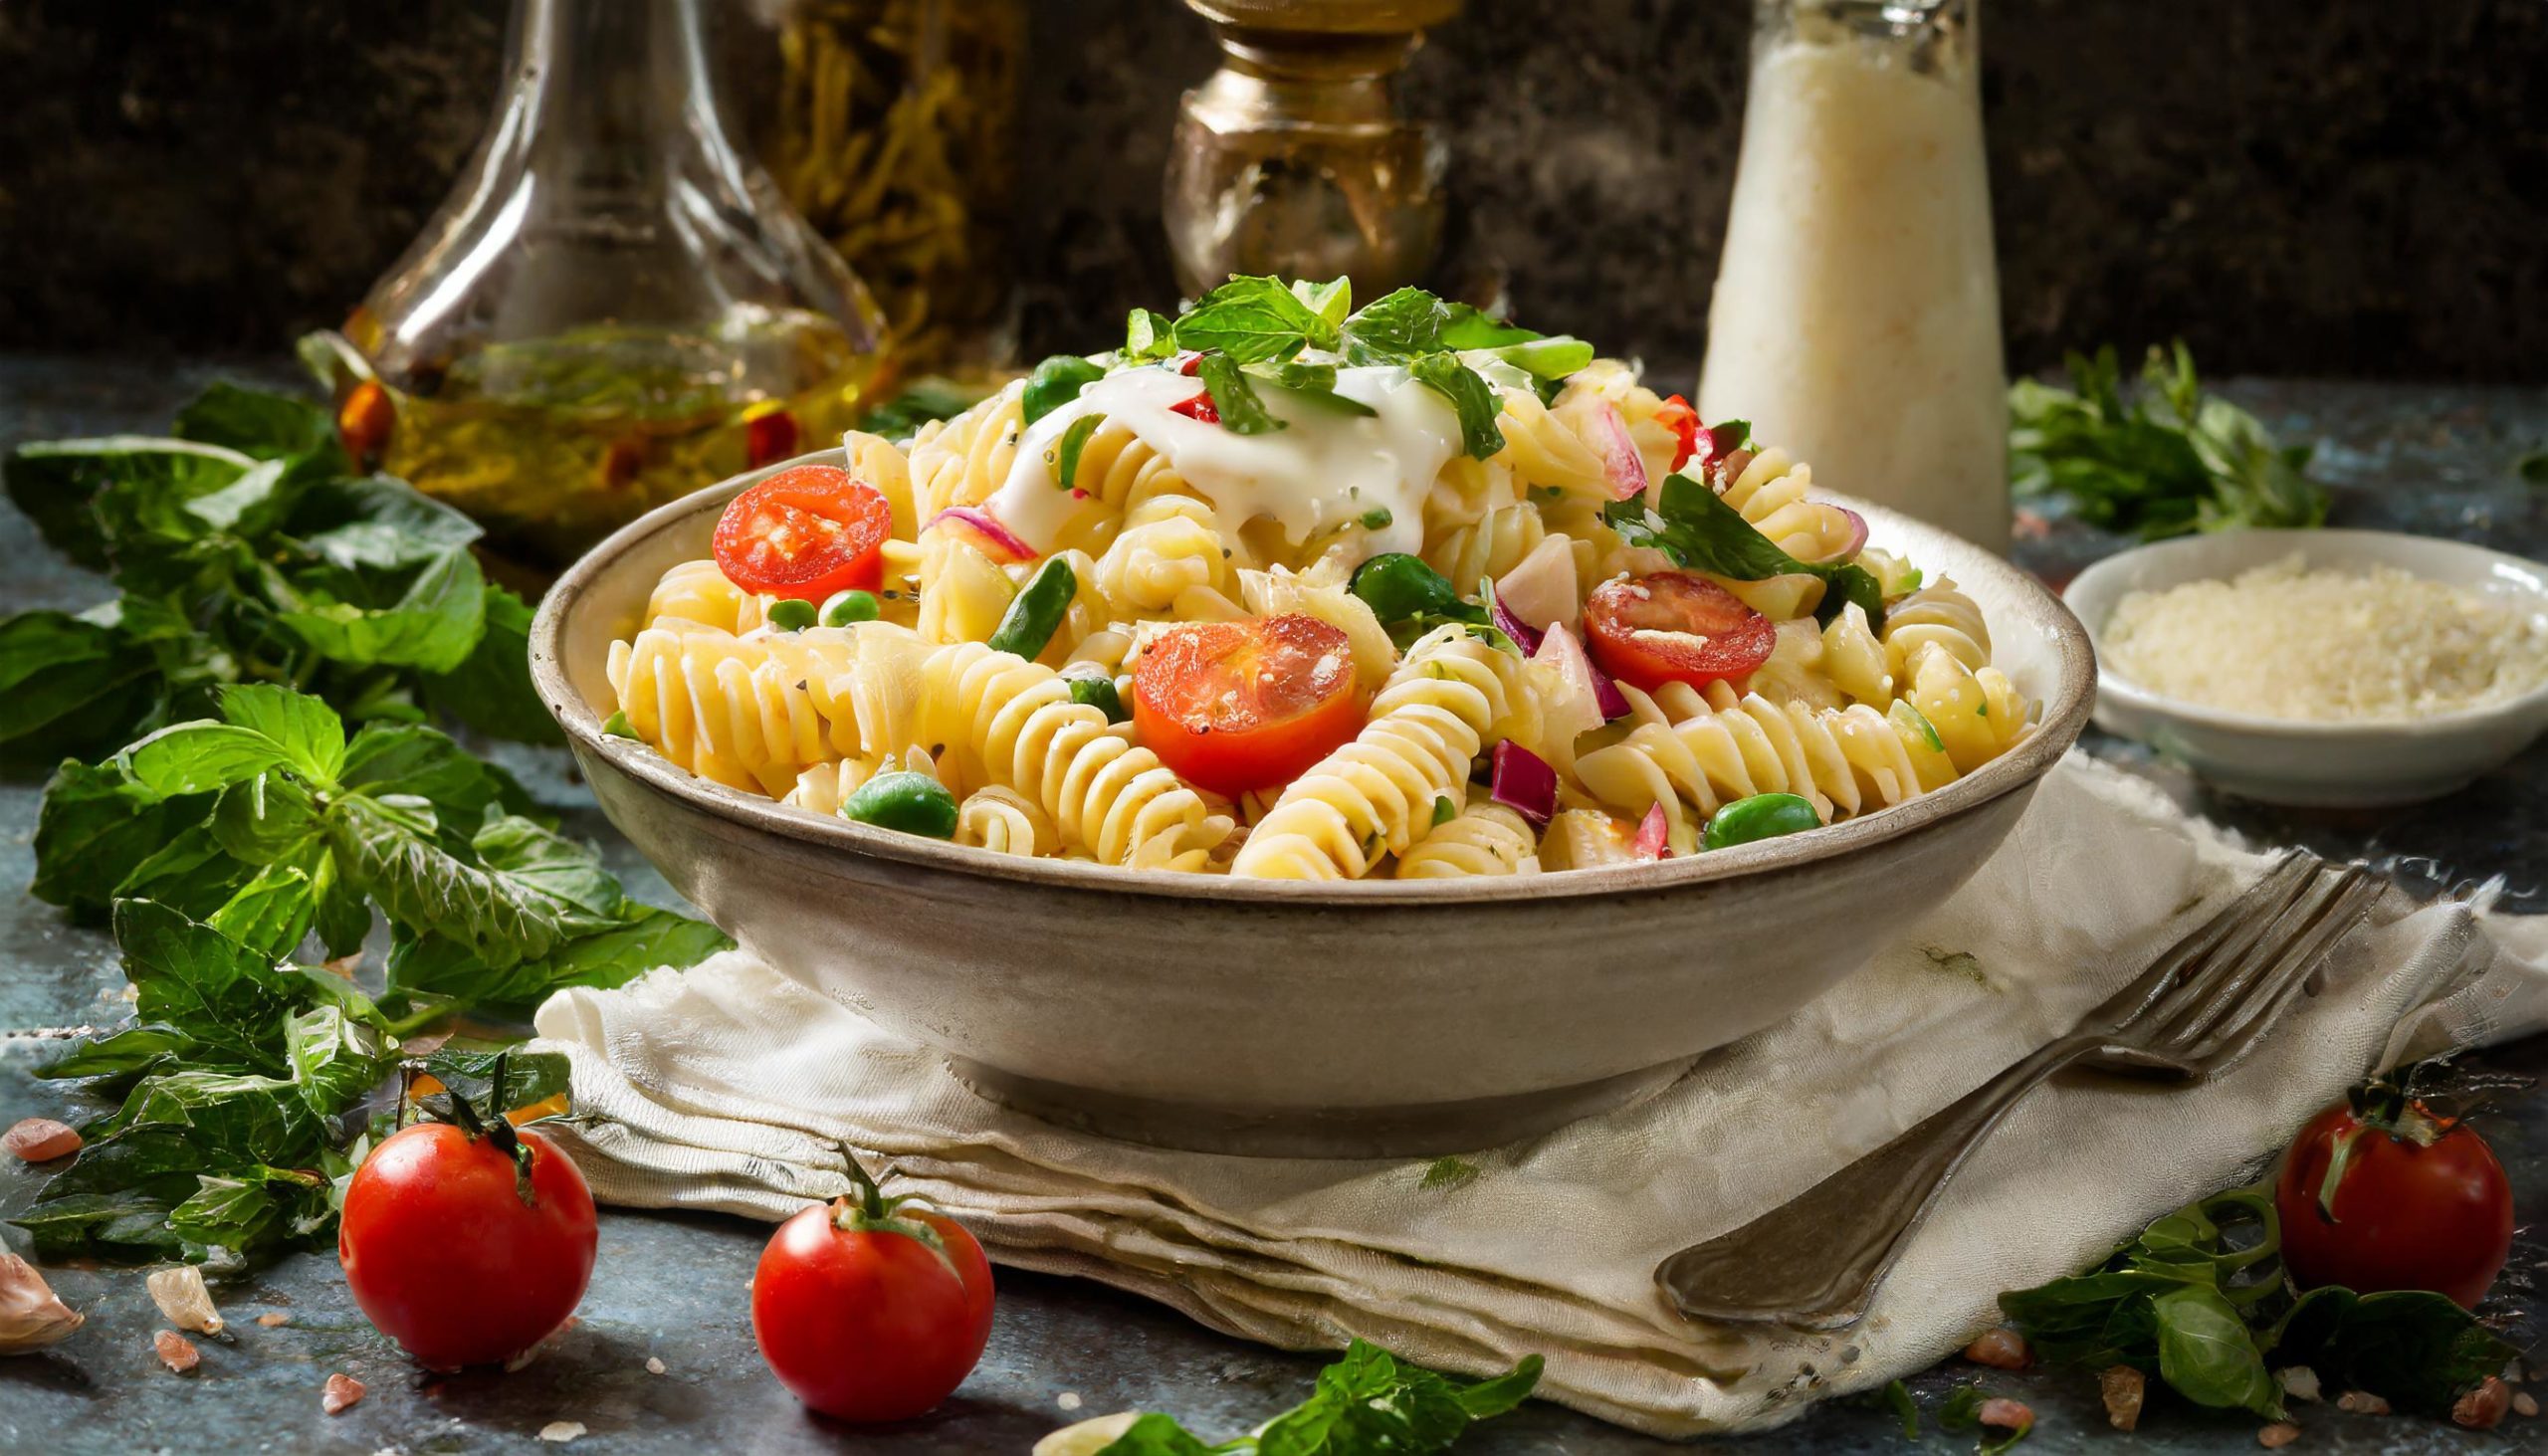 Pasta salad with homemade dressing